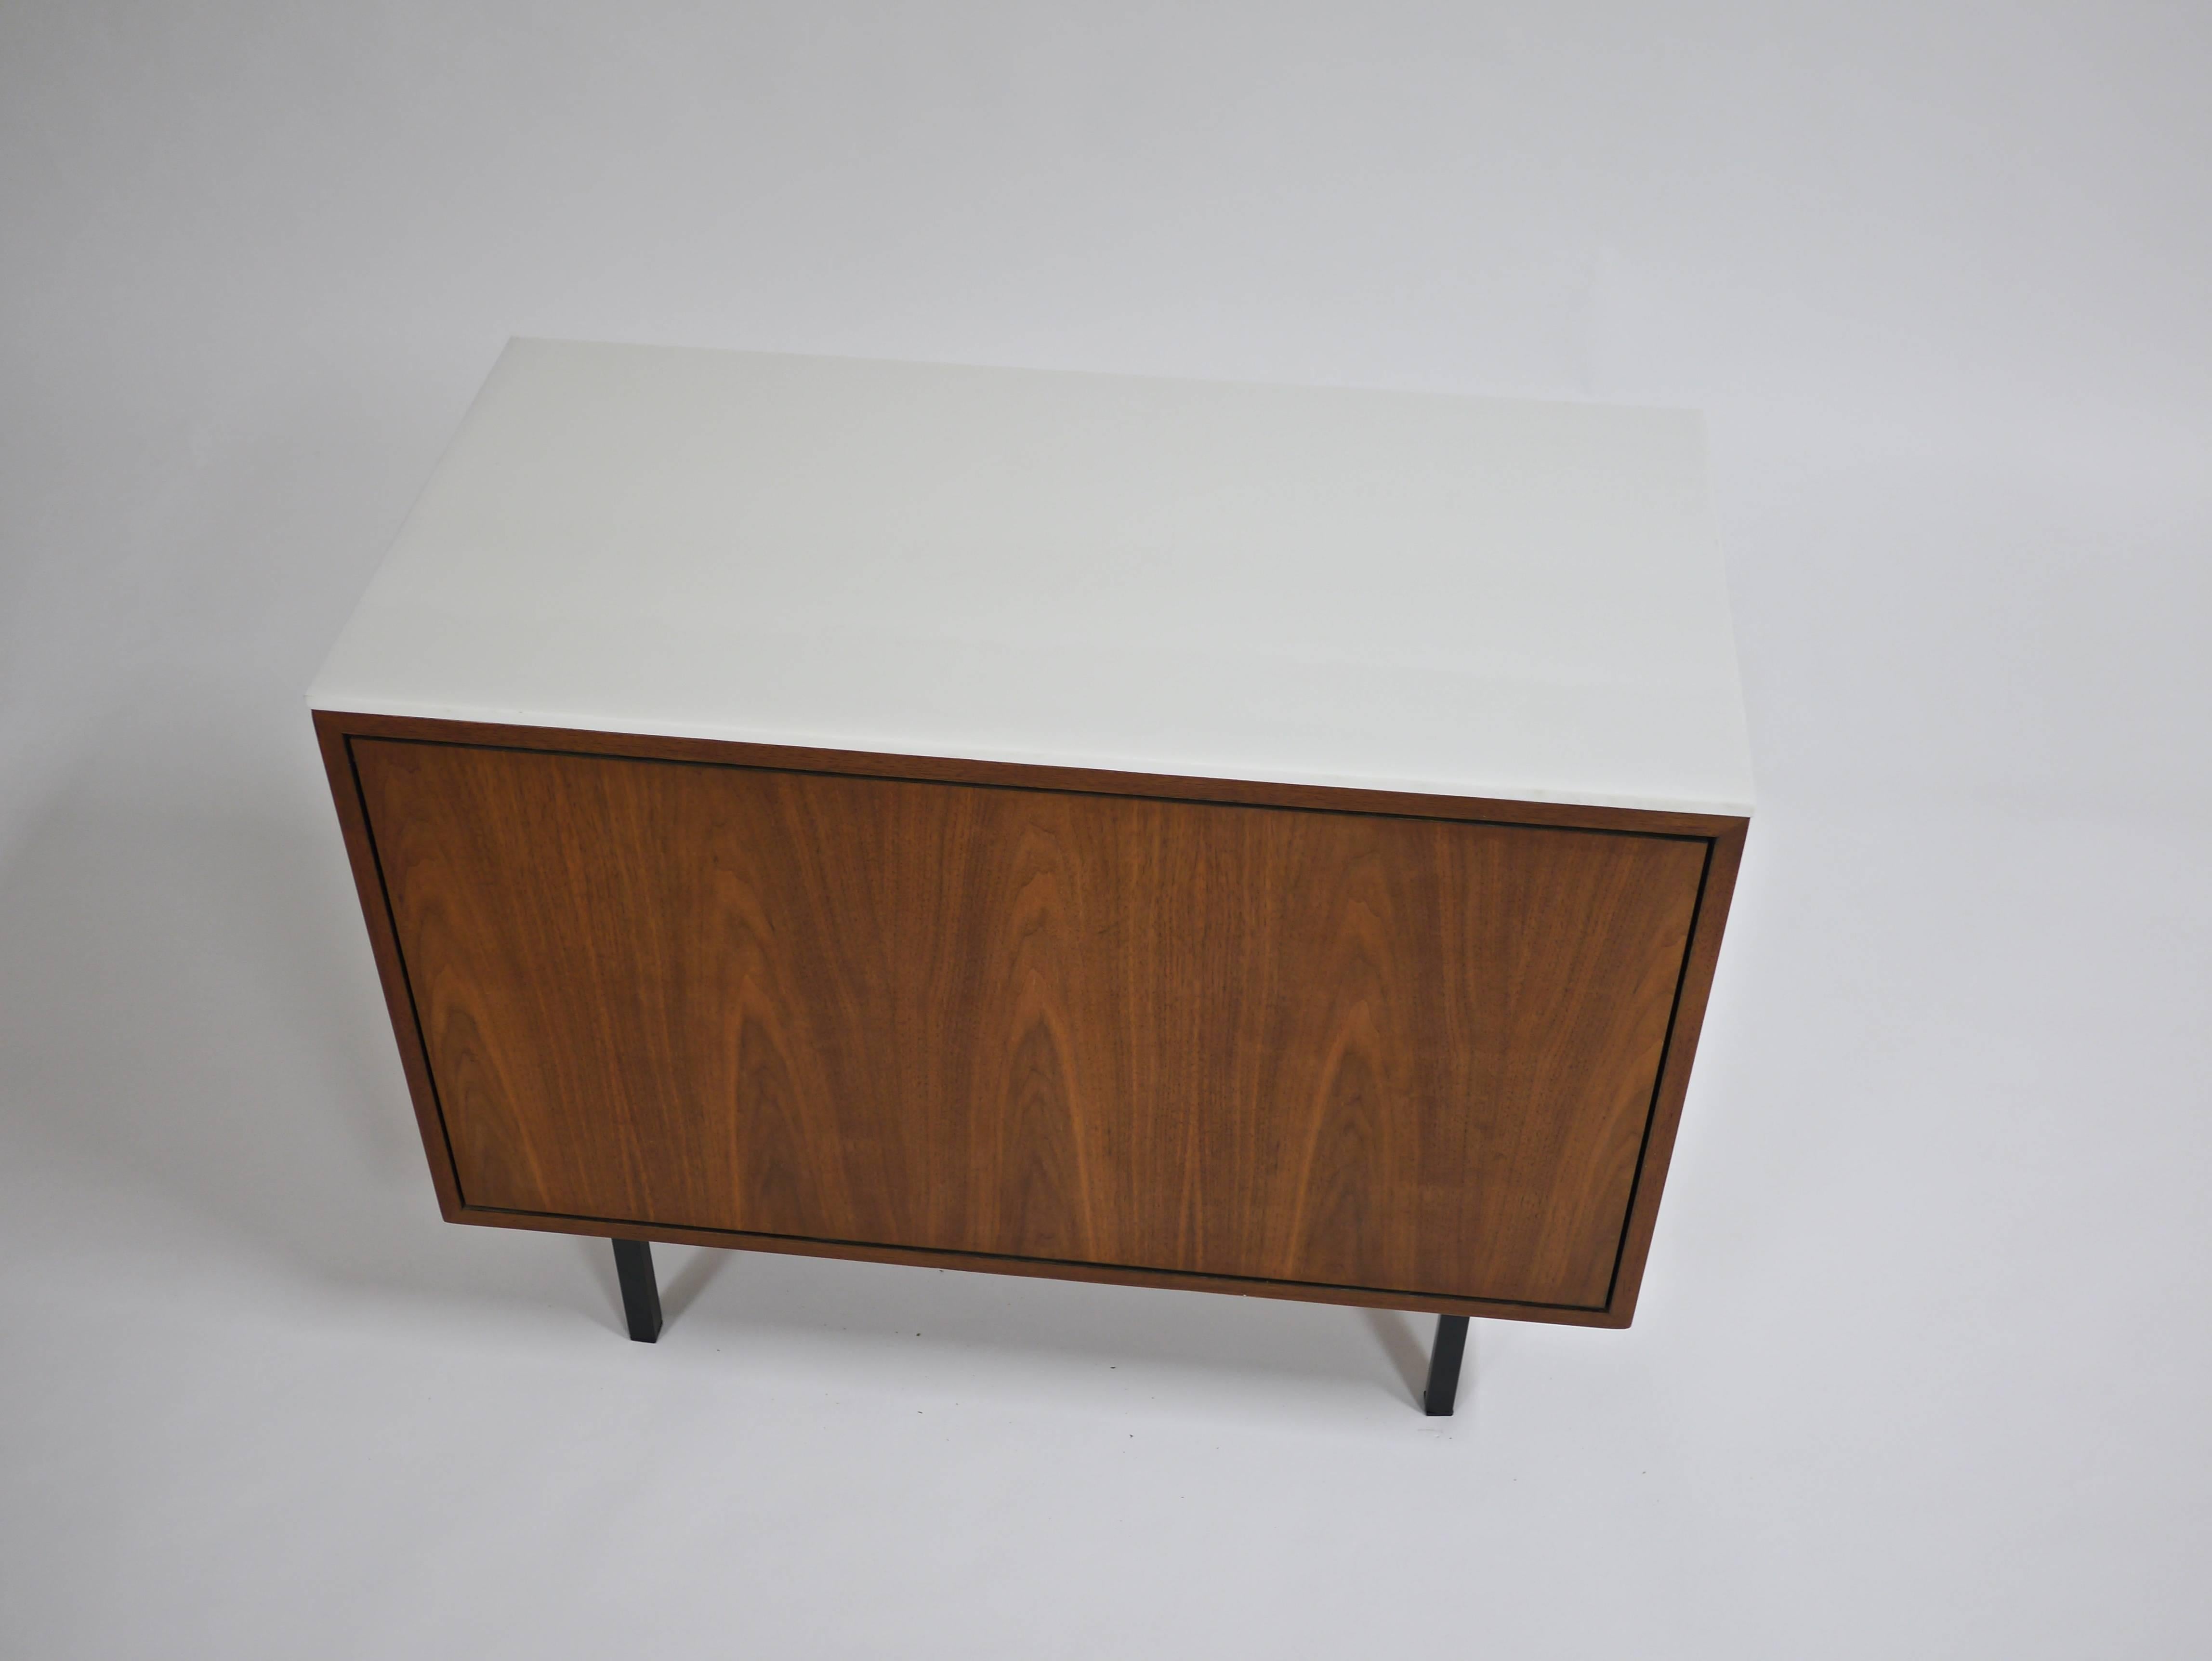 North American Pair of Knoll Bar Credenzas in White Lacquer, Walnut and Vitrolite